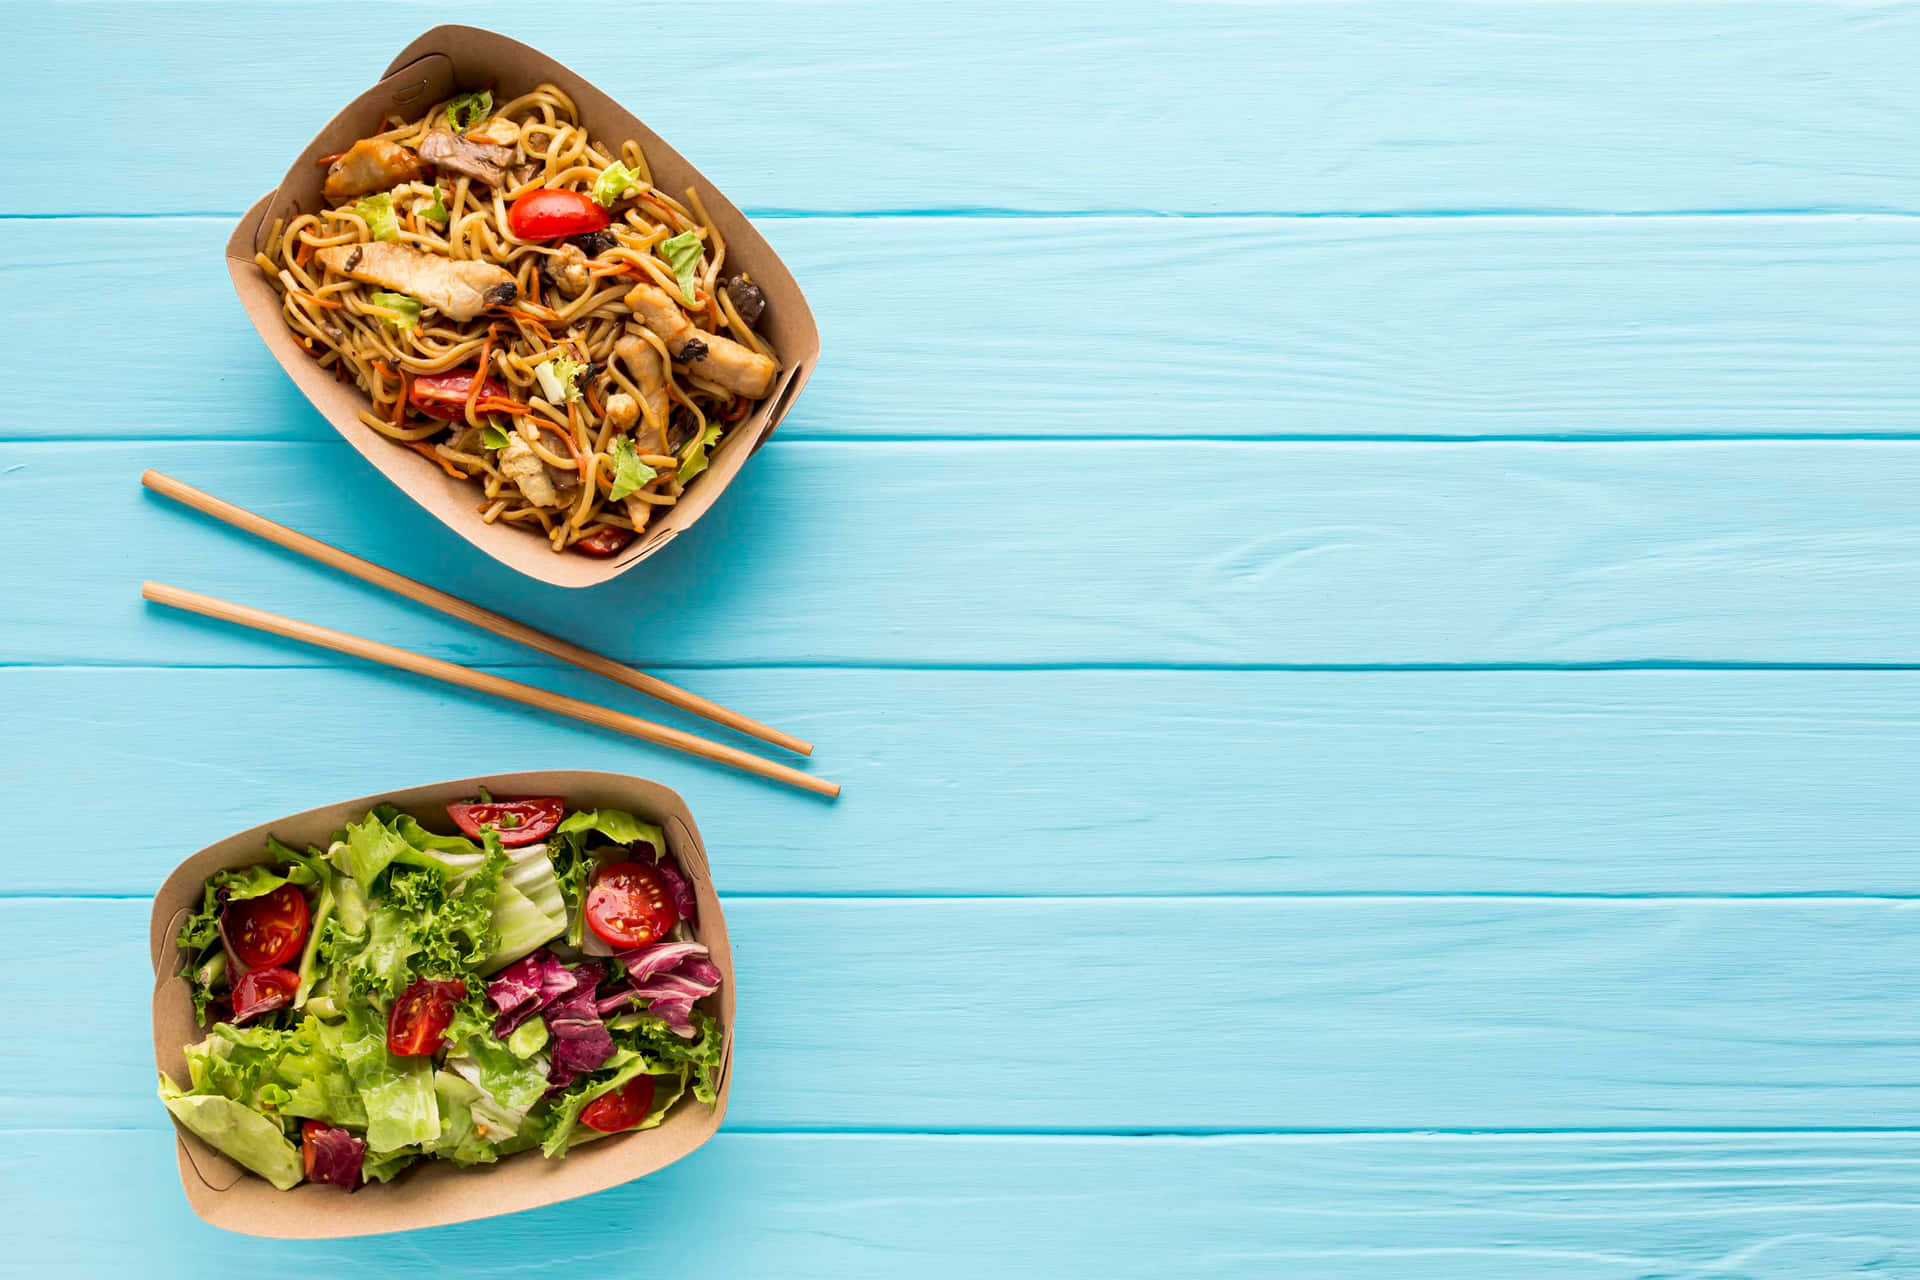 Two Bowls Of Salad And Noodles On A Blue Wooden Table